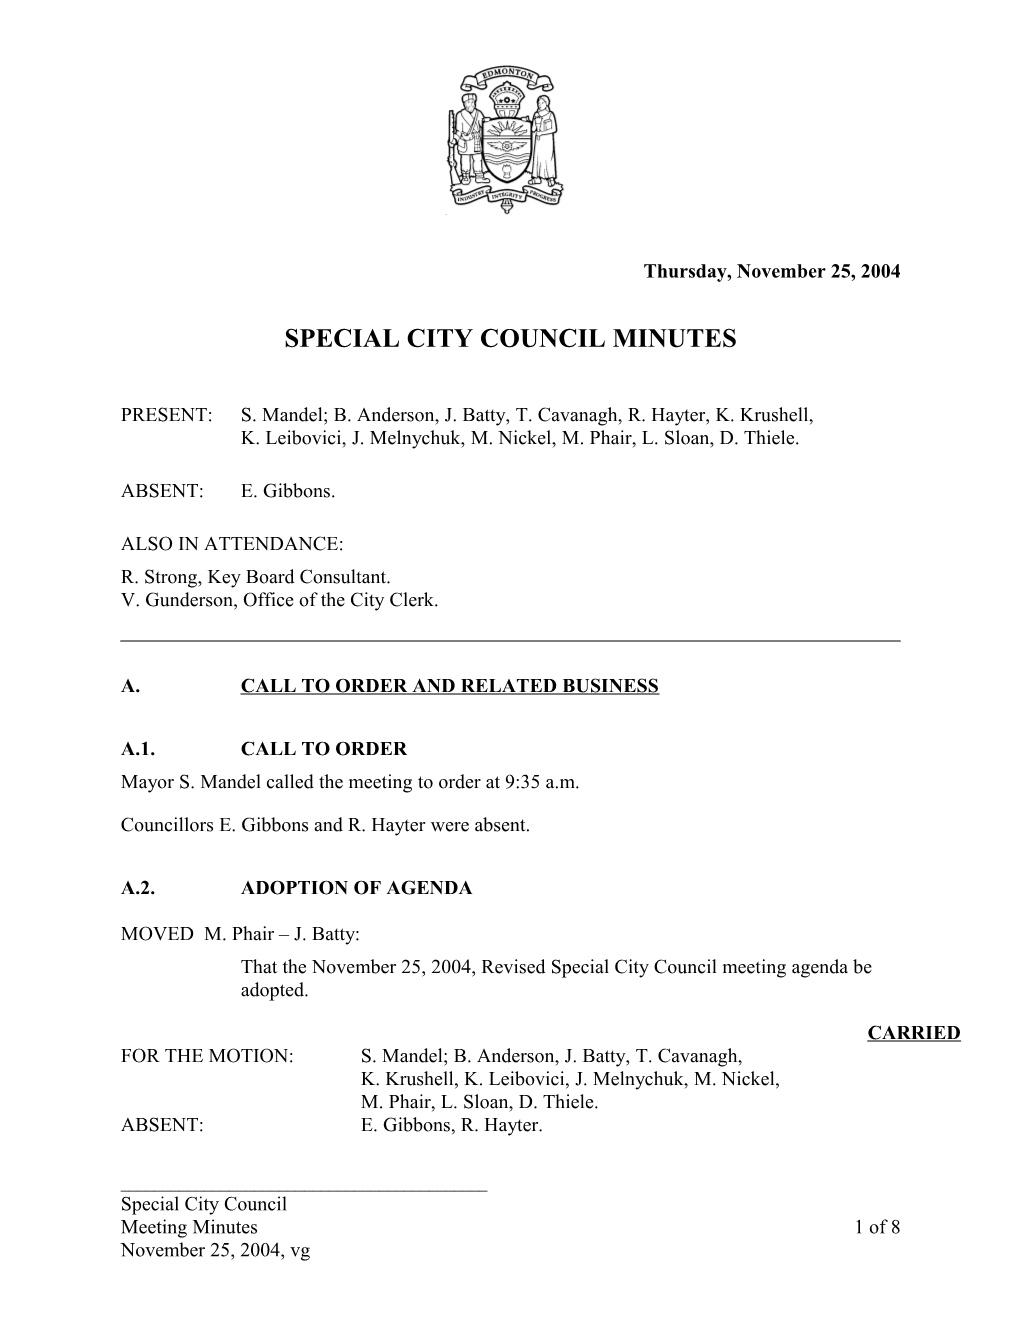 Minutes for City Council November 25, 2004 Meeting